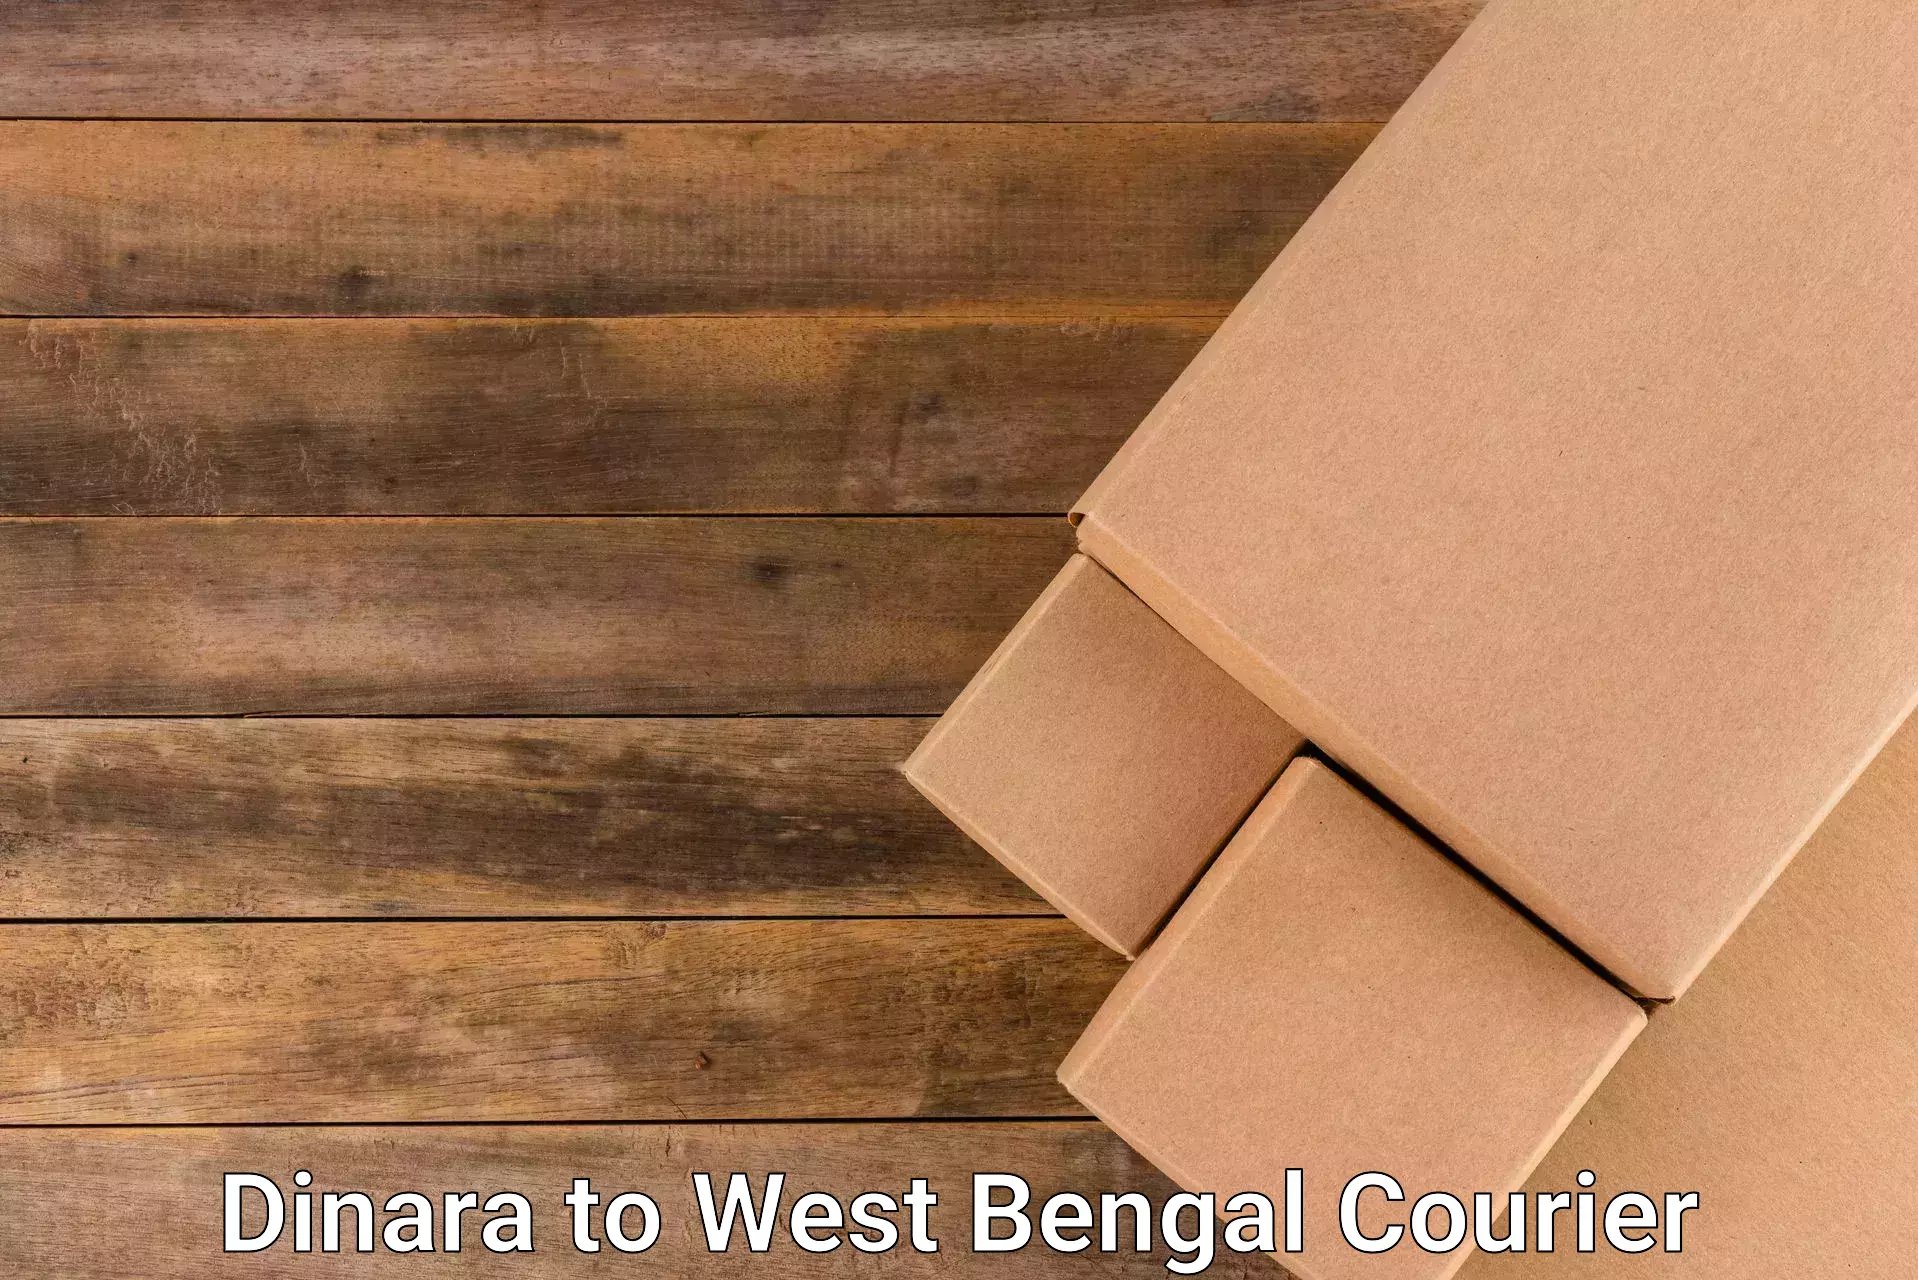 State-of-the-art courier technology Dinara to West Bengal